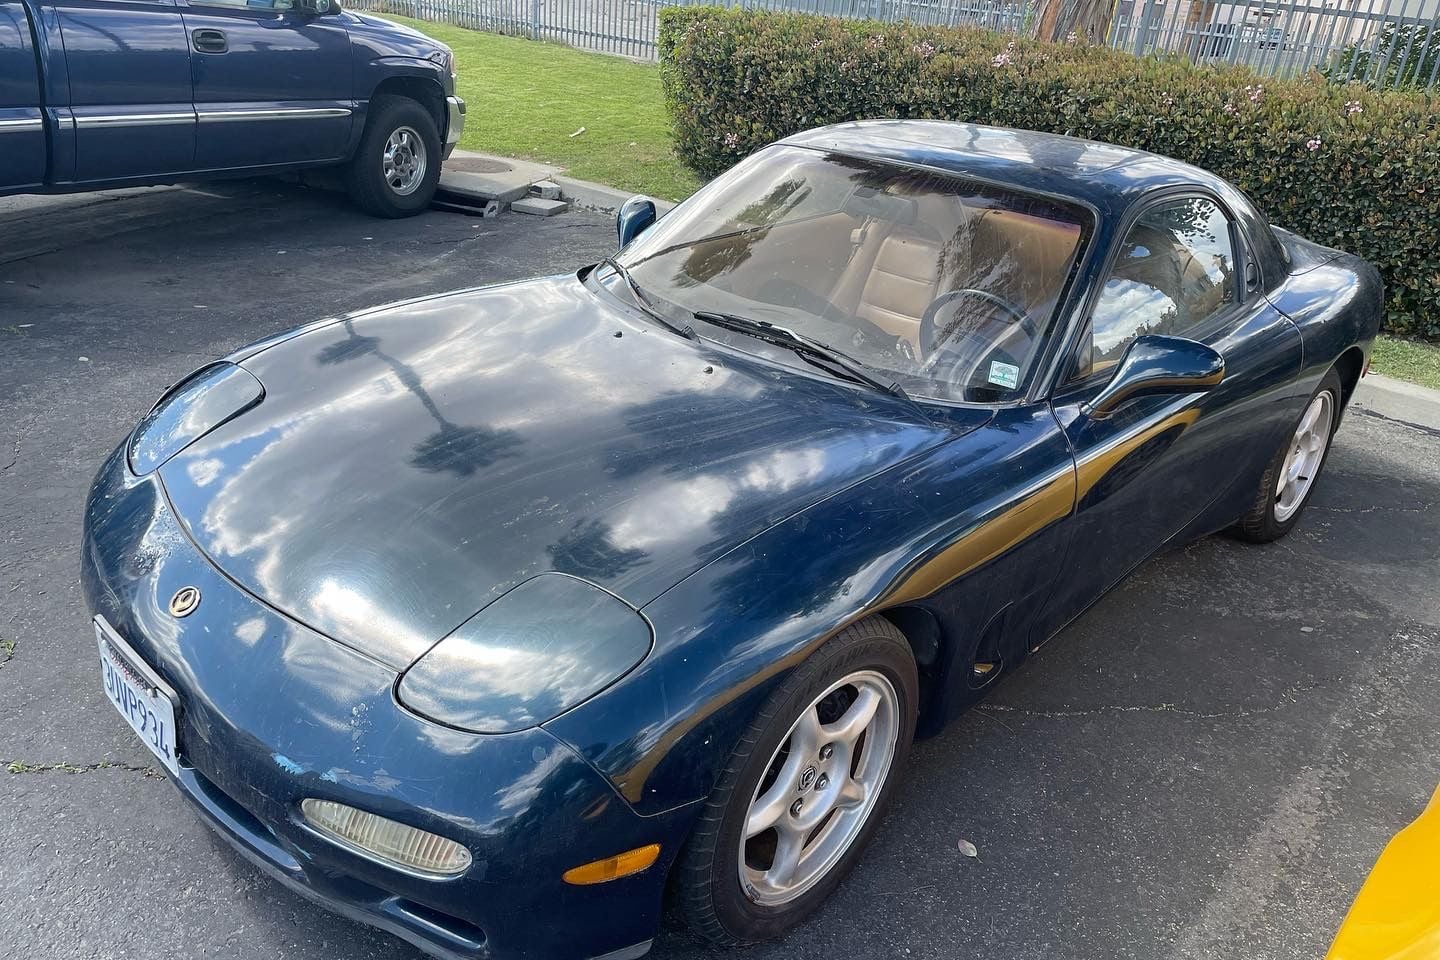 1993 Mazda RX-7 - 1993 RX7 Touring, Clean CA title car, will come with new crate motor - Used - VIN JM1FD331xp0203069 - 97,000 Miles - Other - 2WD - Manual - Hatchback - Blue - Rosamond, CA 93560, United States